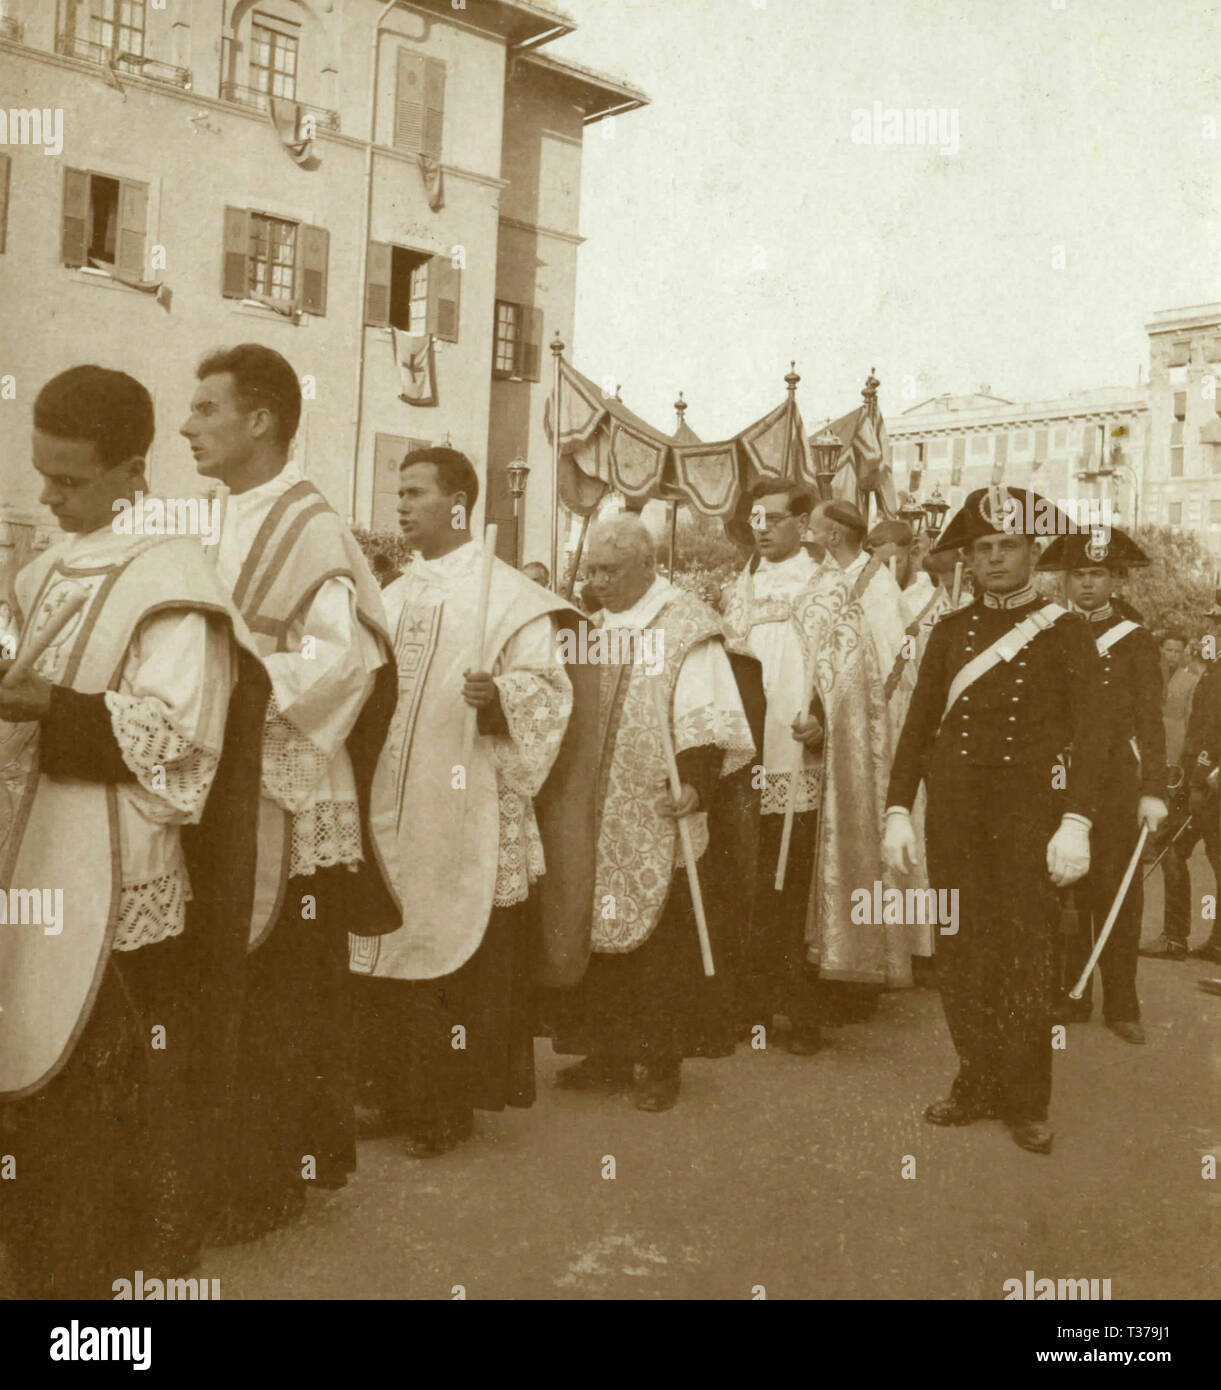 Catholic priests and carabinieri during the Cristo Re procession, Rome, Italy 1920s Stock Photo